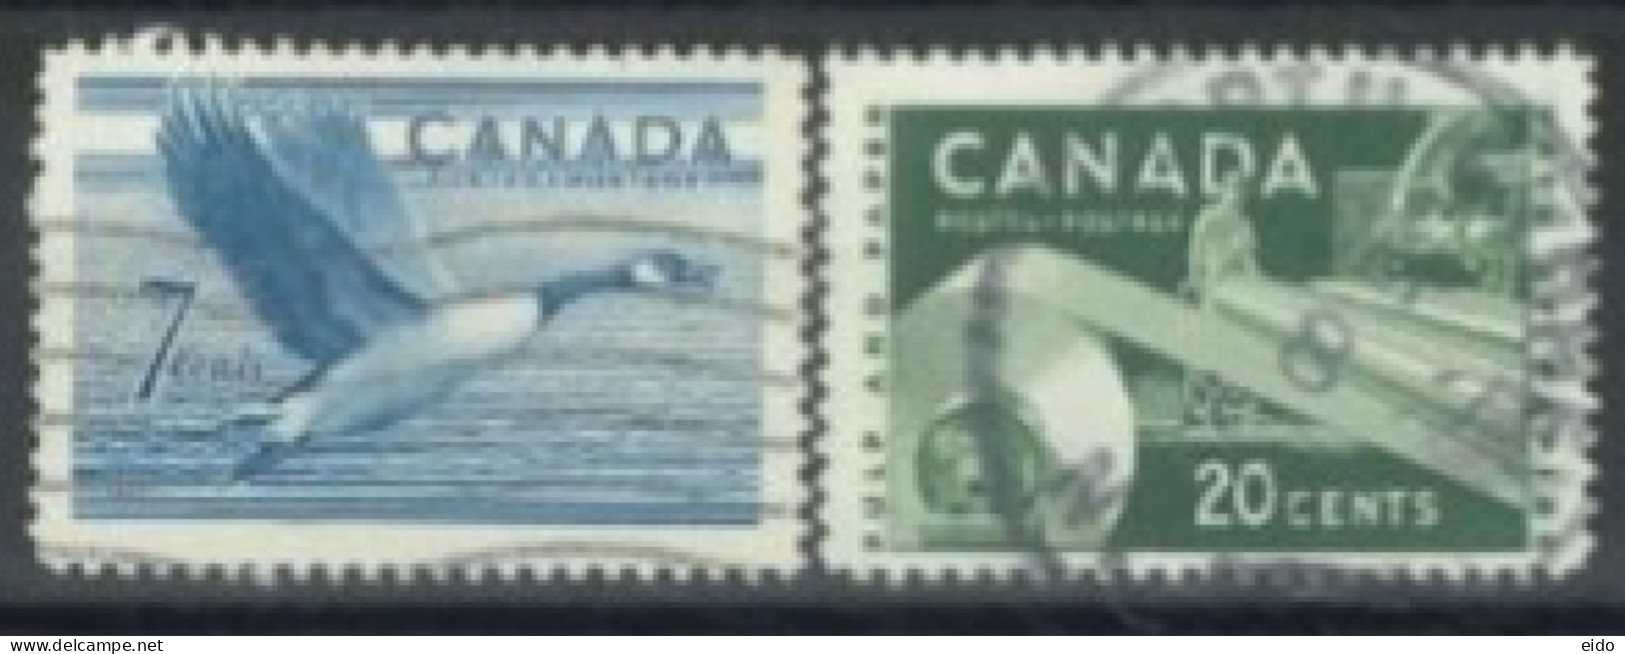 CANADA - 1952/53, CANADIAN GOOSE & PULP & PAPER INDUSTRY. STAMPS SET OF 2, USED. - Gebraucht